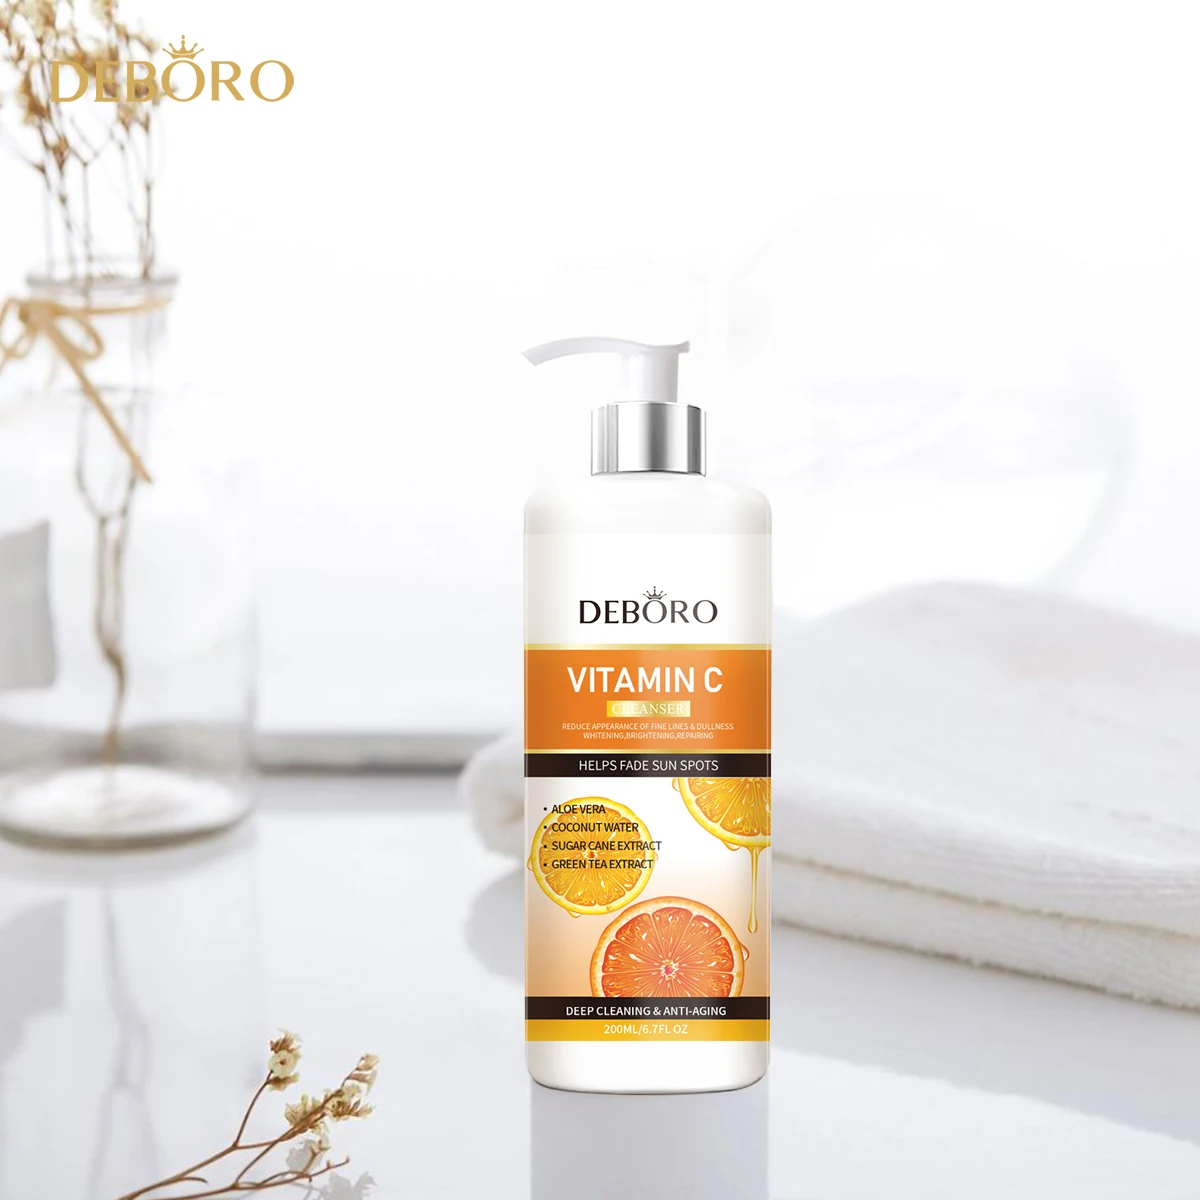 

Deboro facial cleanser wash Hydrating Pore Cleansing Moisturizing Whitening Vitamin C Face Pore Cleanser